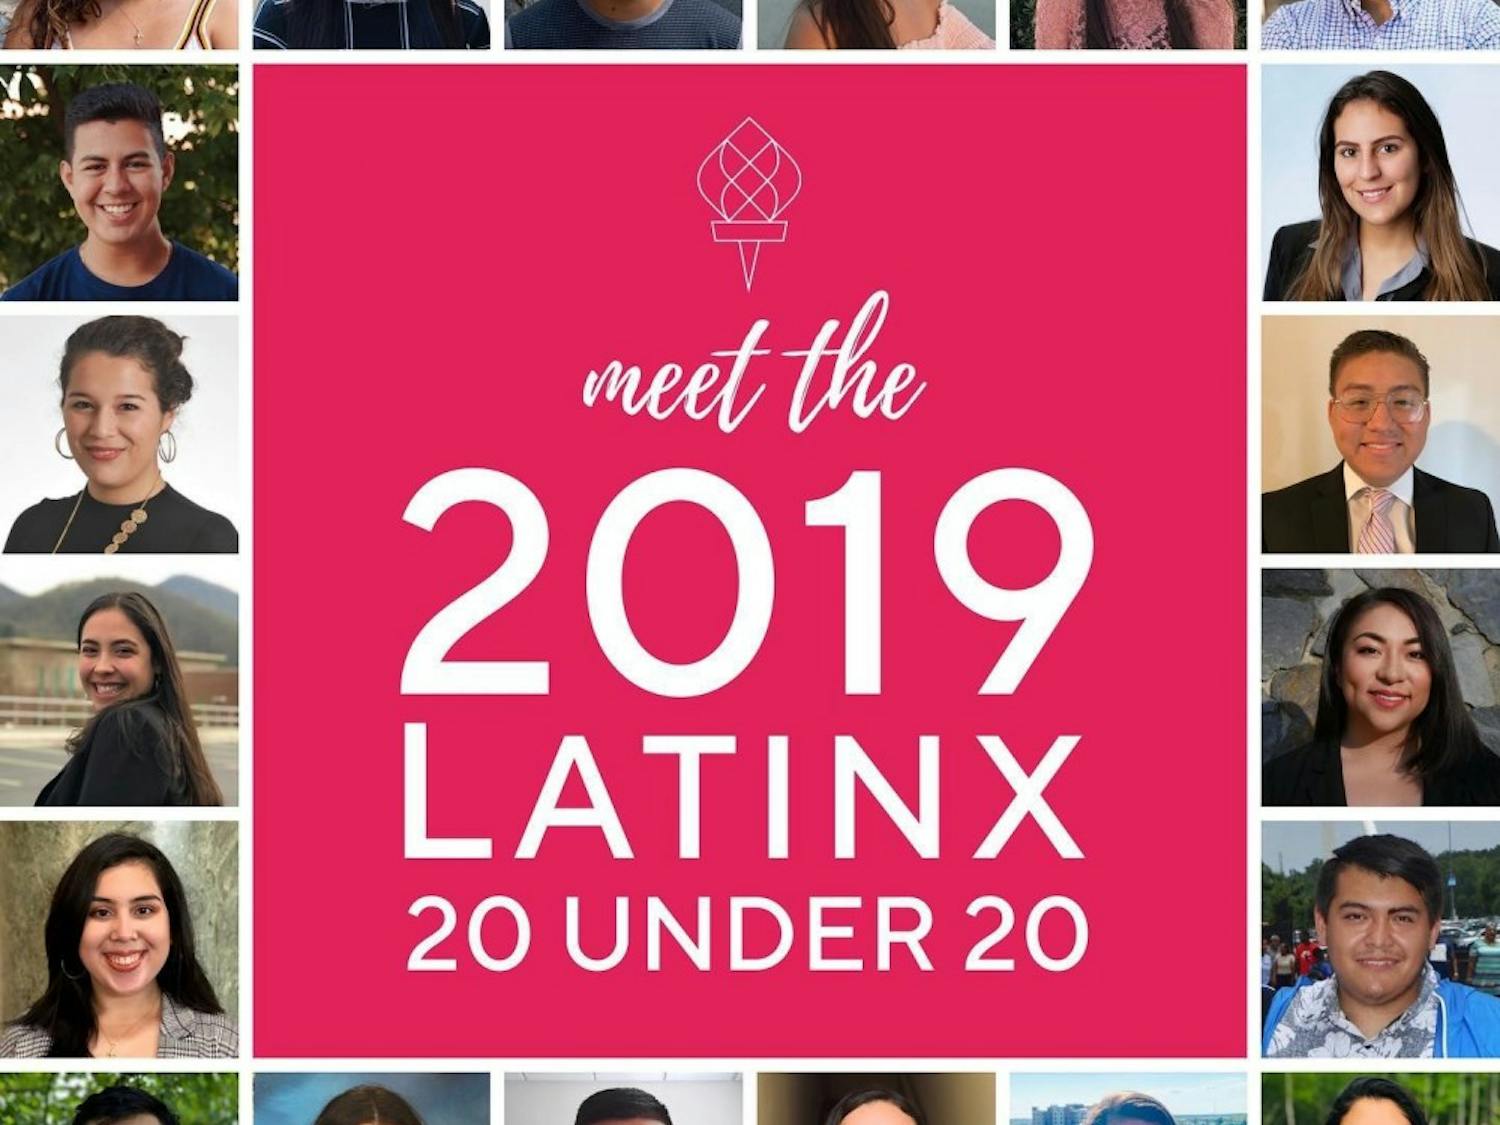 On Saturday, Oct. 12, 2019, LatinxEd's annual 20 Under 20 banquet will celebrate 20 Latinx scholars who exemplify scholarship, community and leadership. Photo courtesy of Verenisse Ponce-Soria.